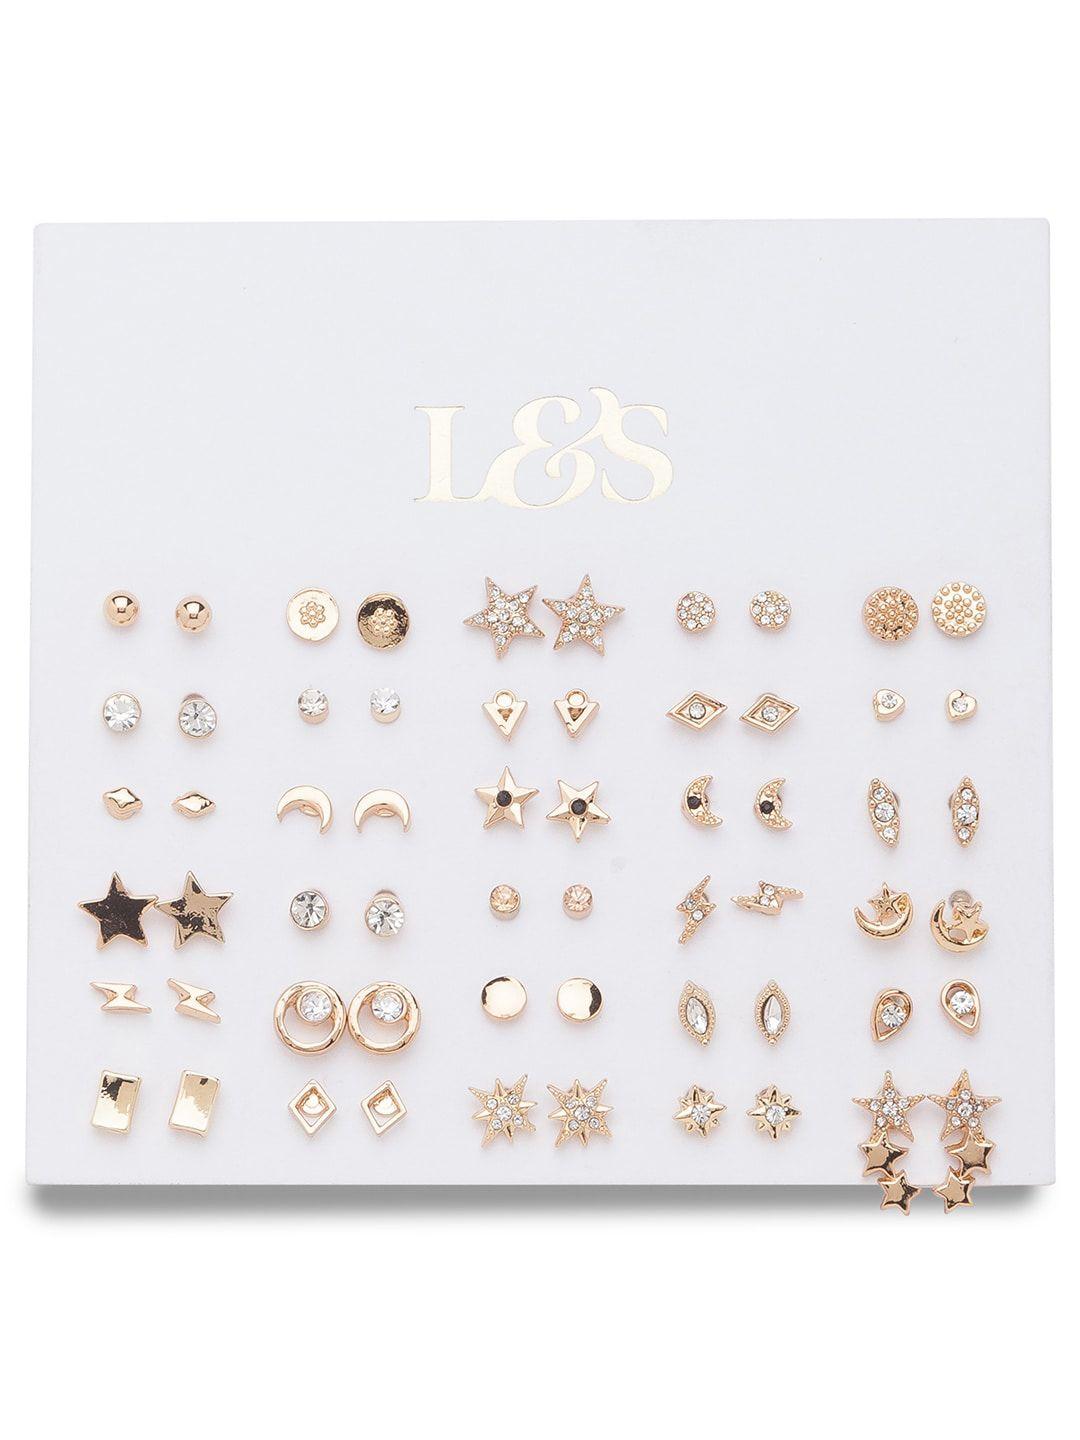 lilly & sparkle set of 30 gold-toned contemporary studs earrings